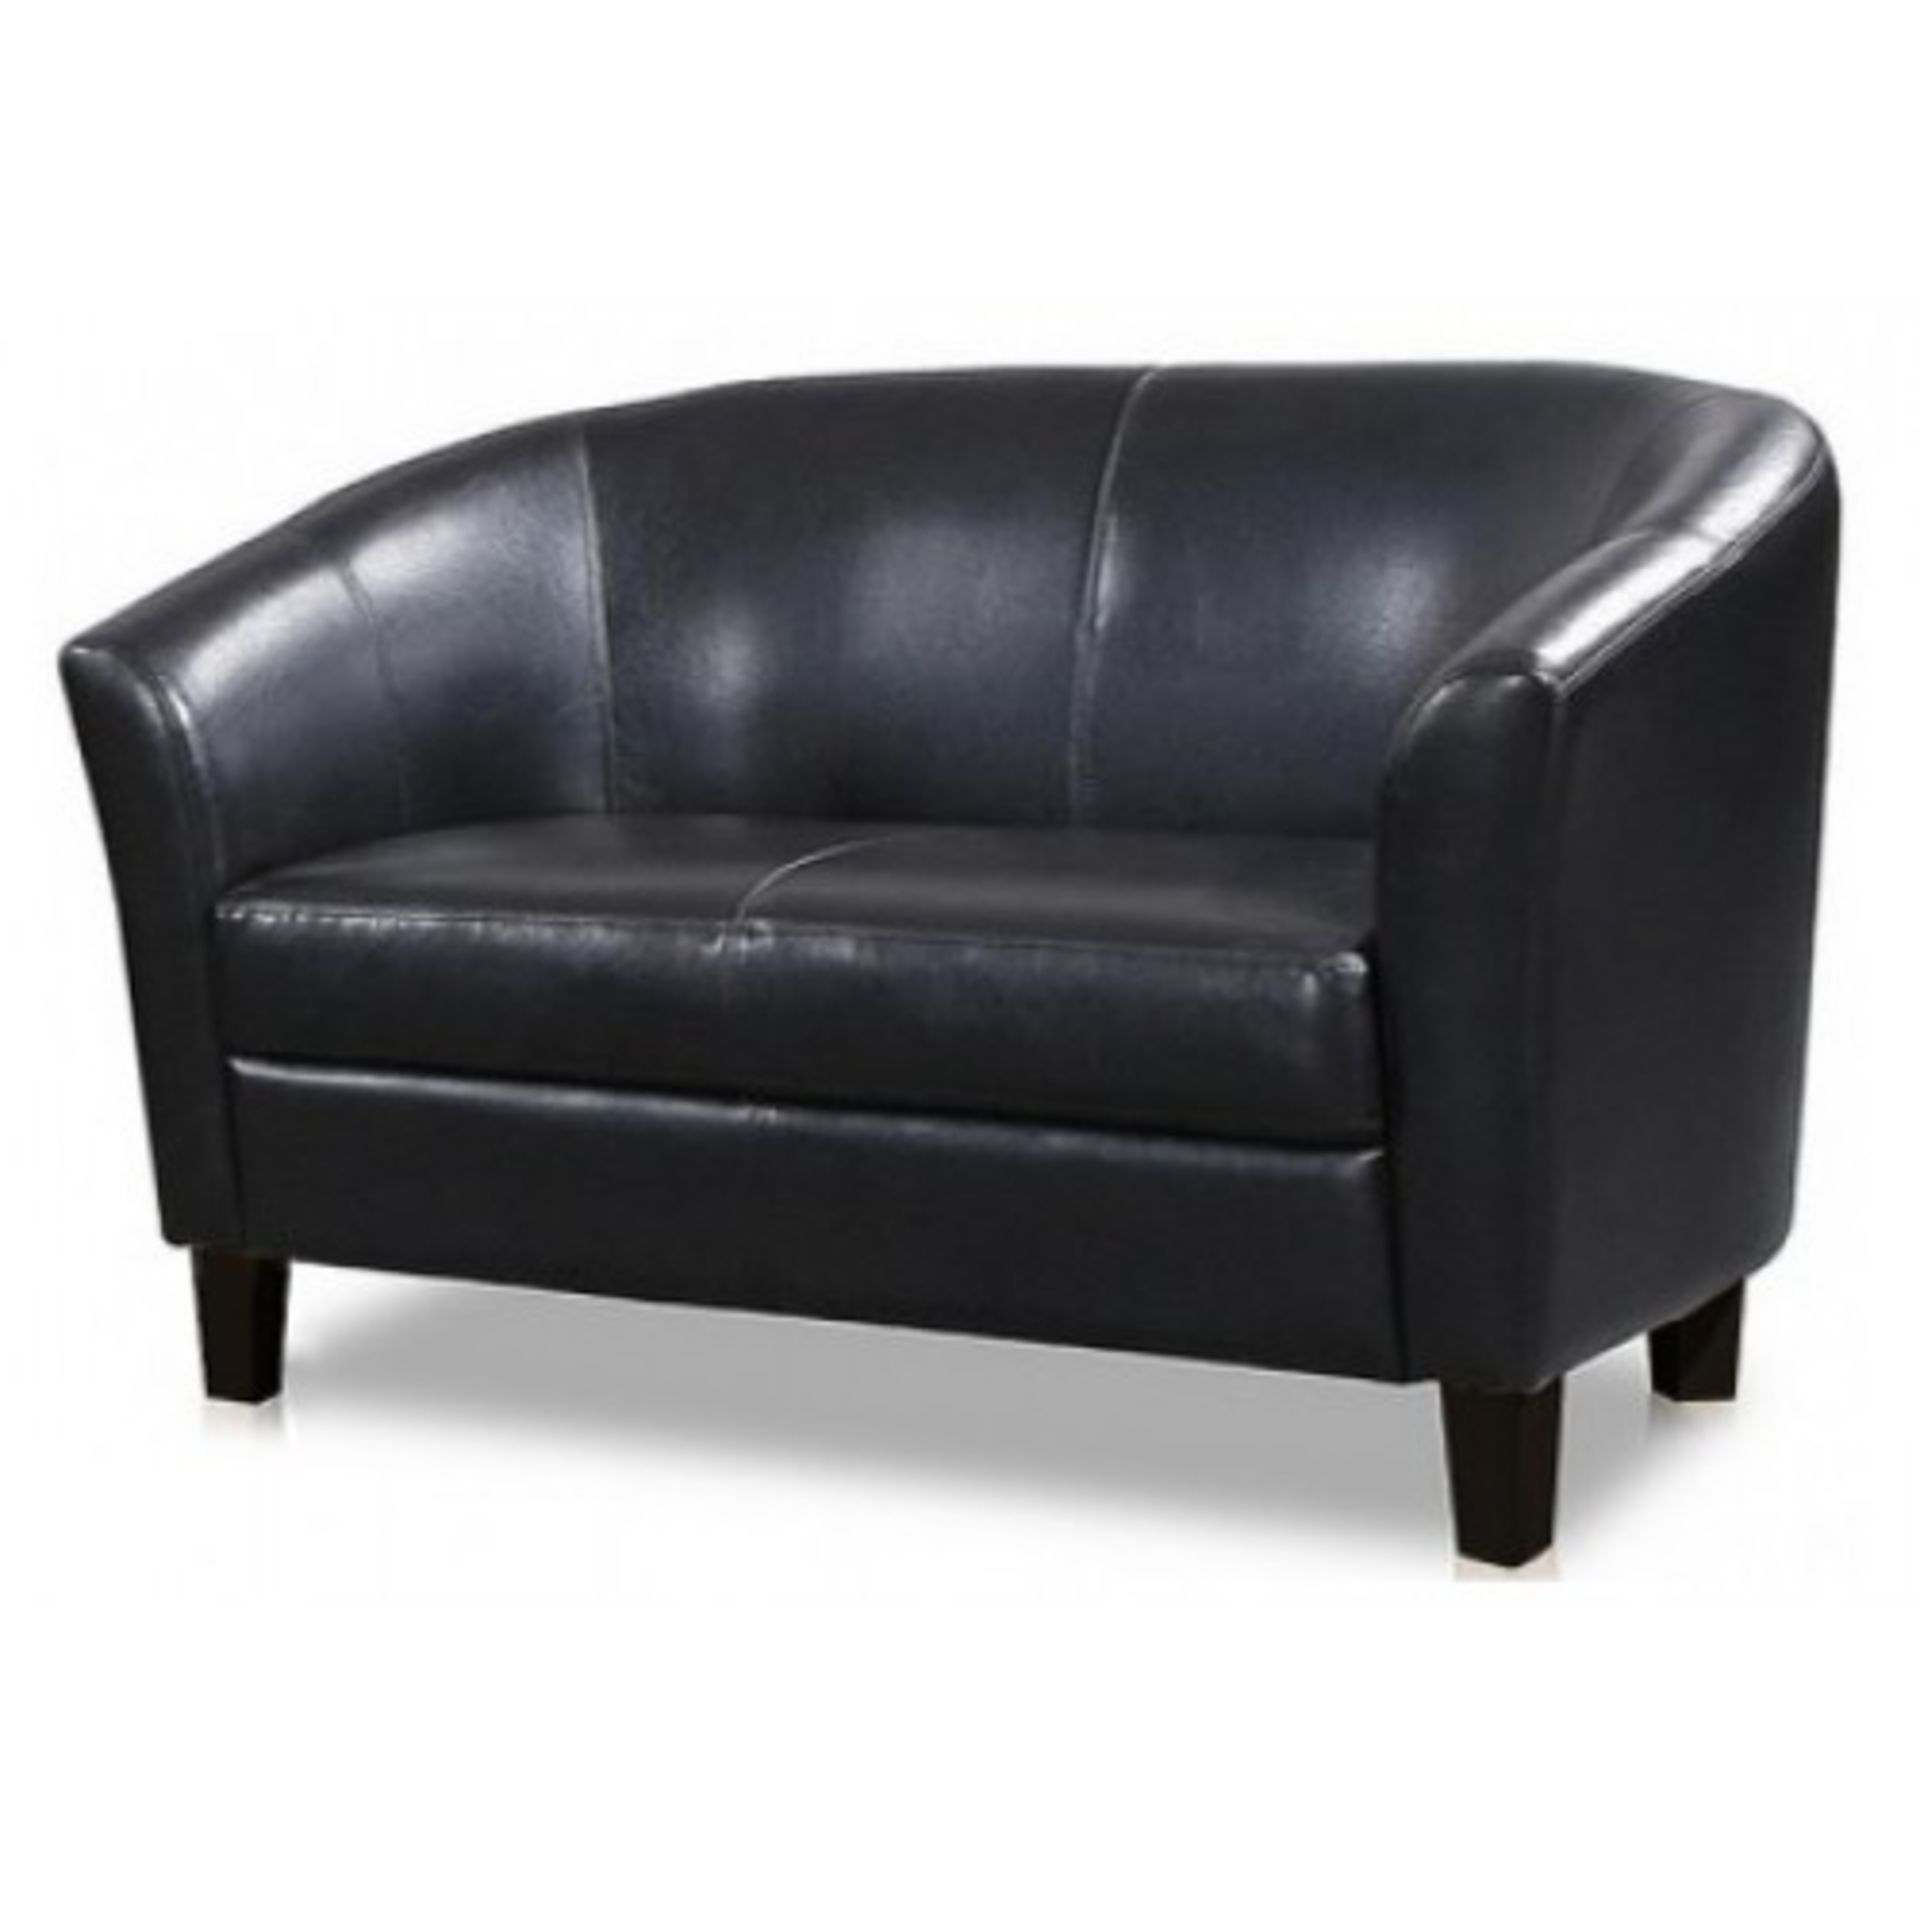 Brand new boxed direct from the manufacturers, Black faux leather 2 seater tub sofa with dark wooden